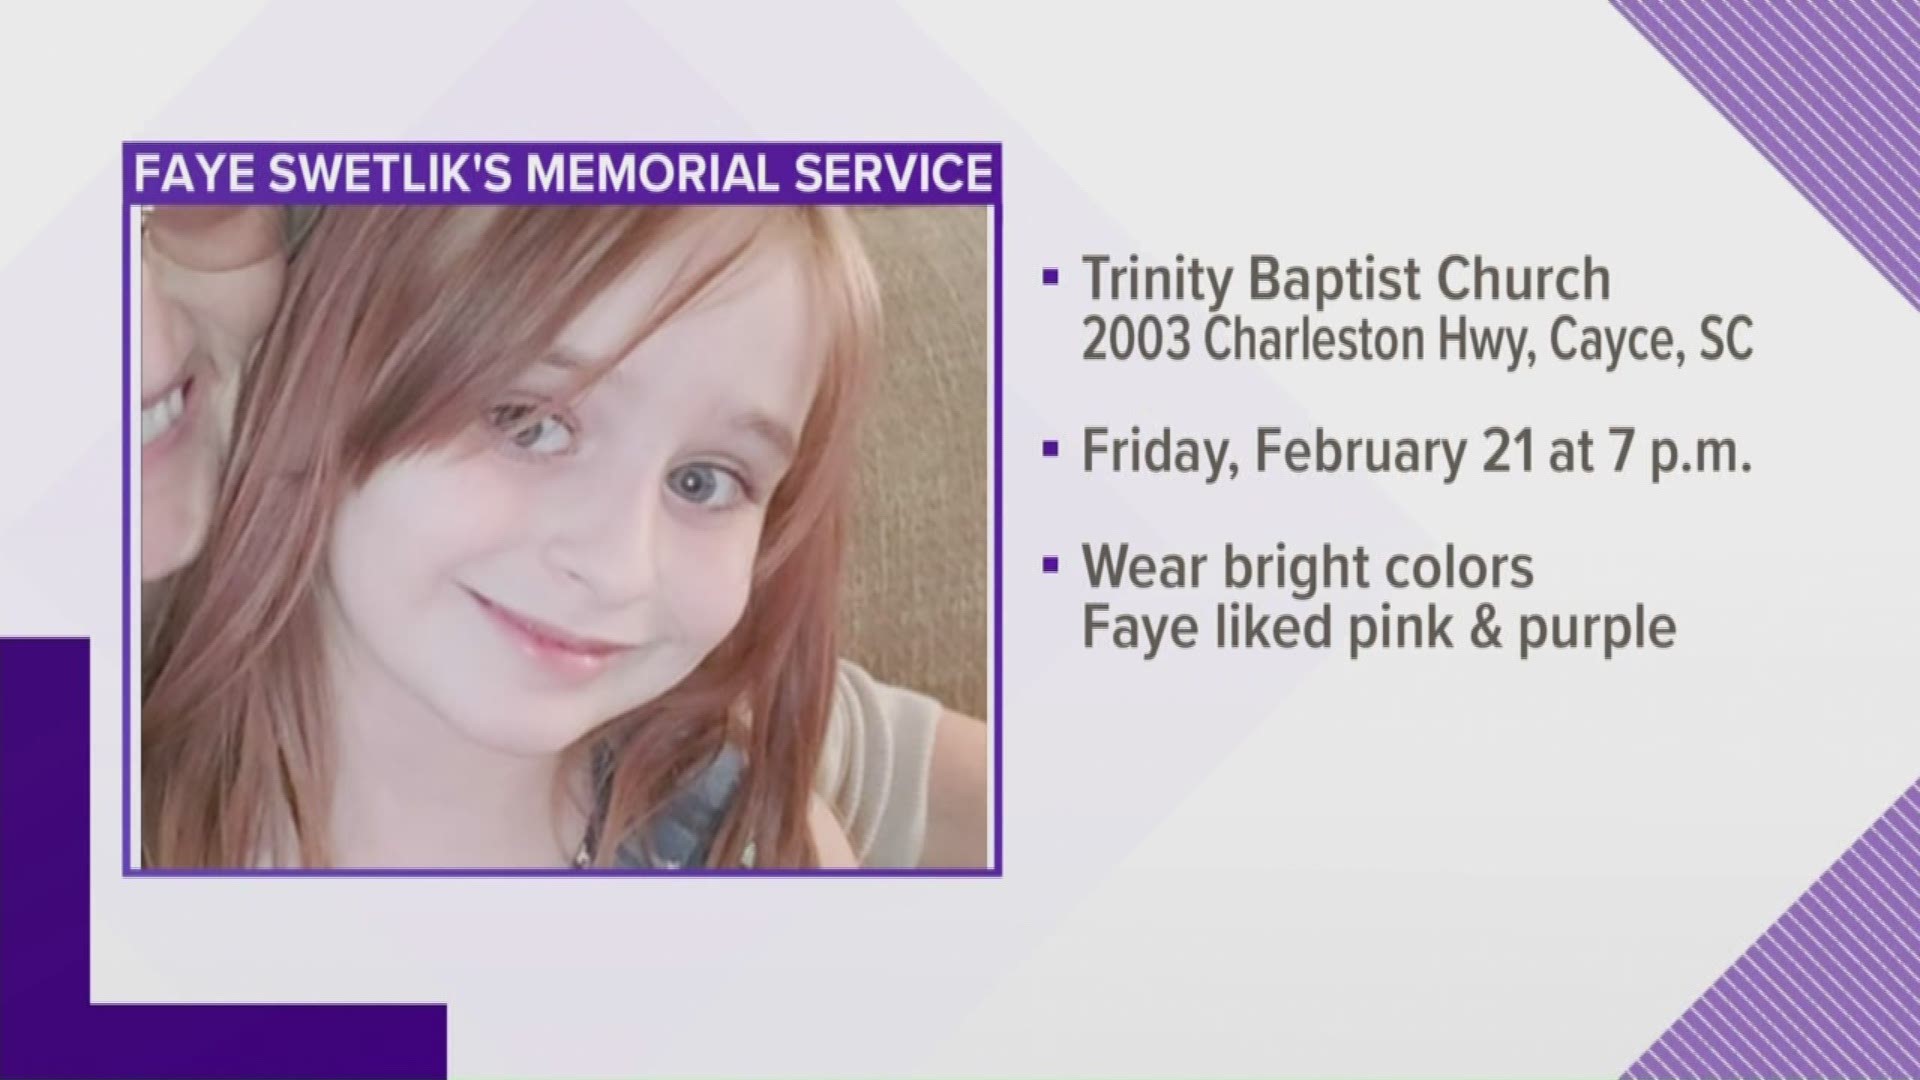 A memorial service is to be held Friday for Faye Swetlik and the public is invited to attend.